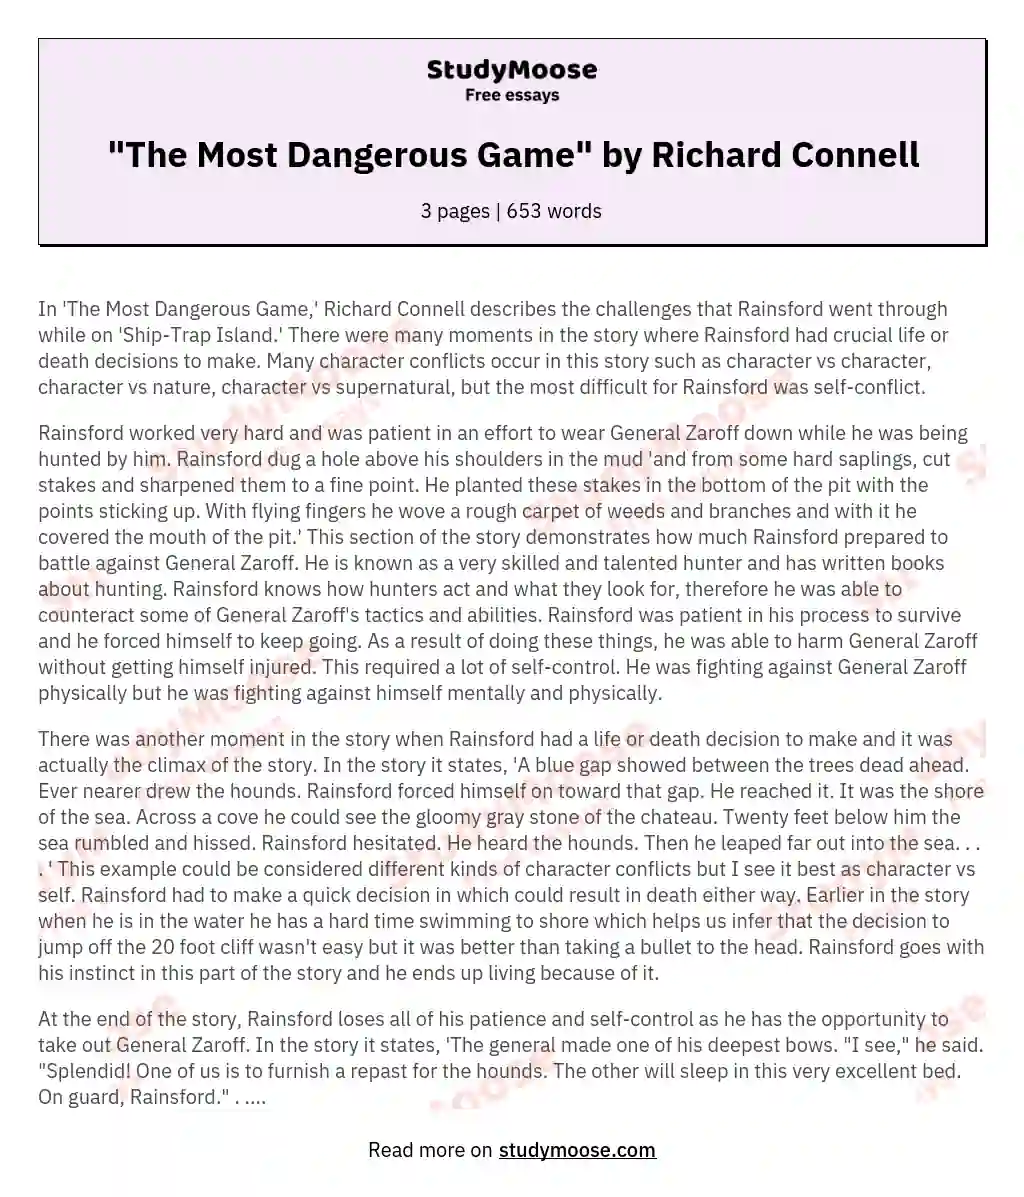 "The Most Dangerous Game" by Richard Connell